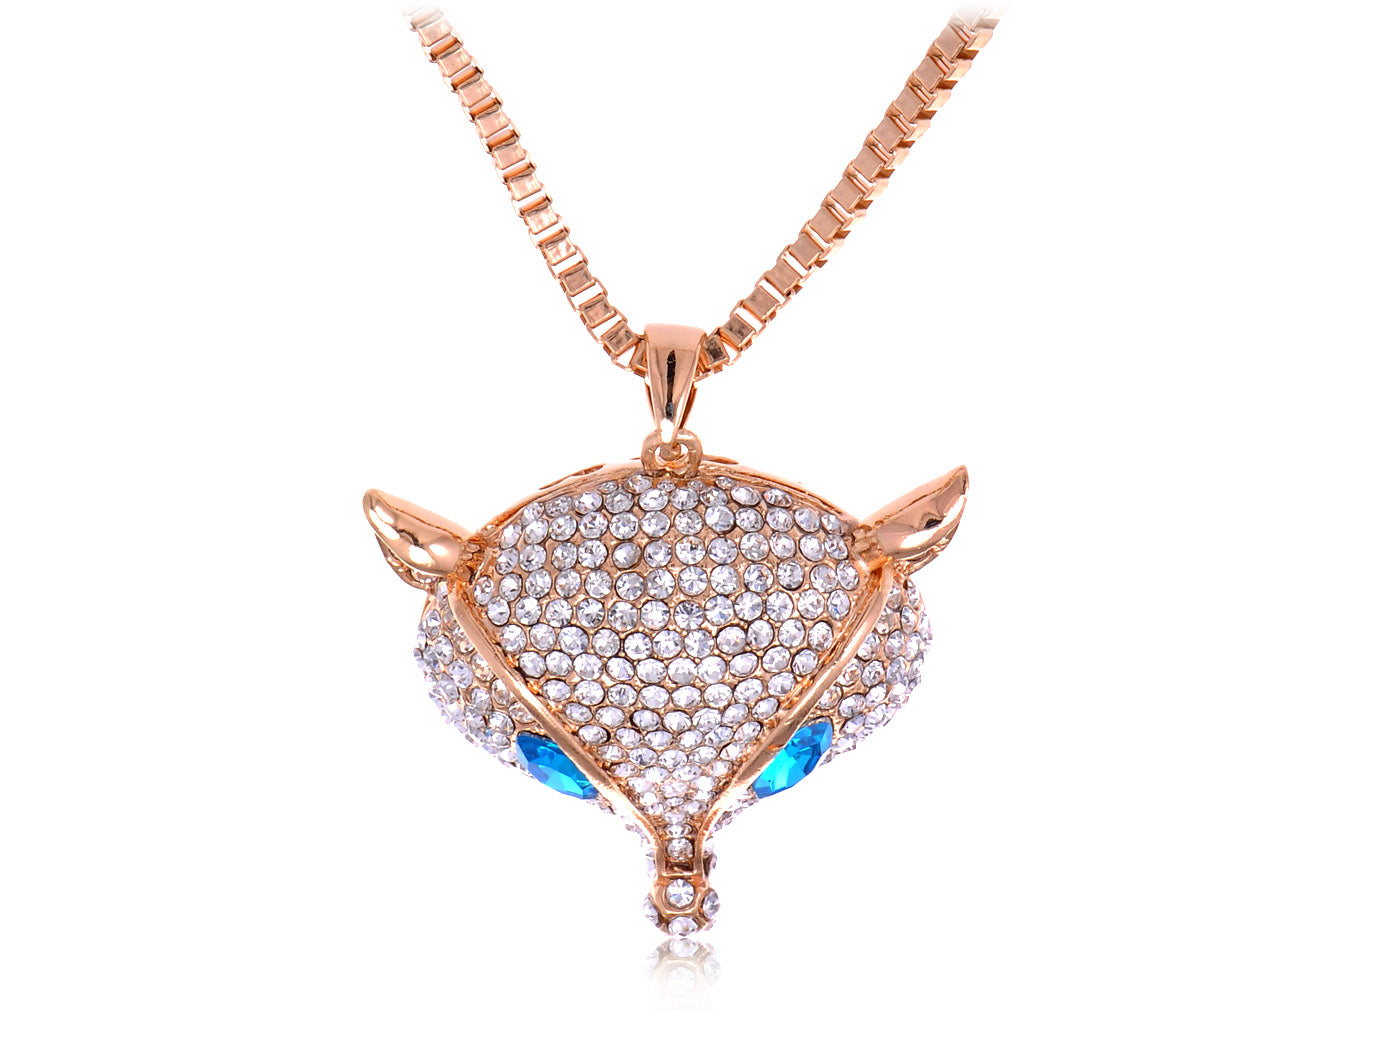 Encrusted Fox D Enamel Necklace With Sapphire Color Eyes